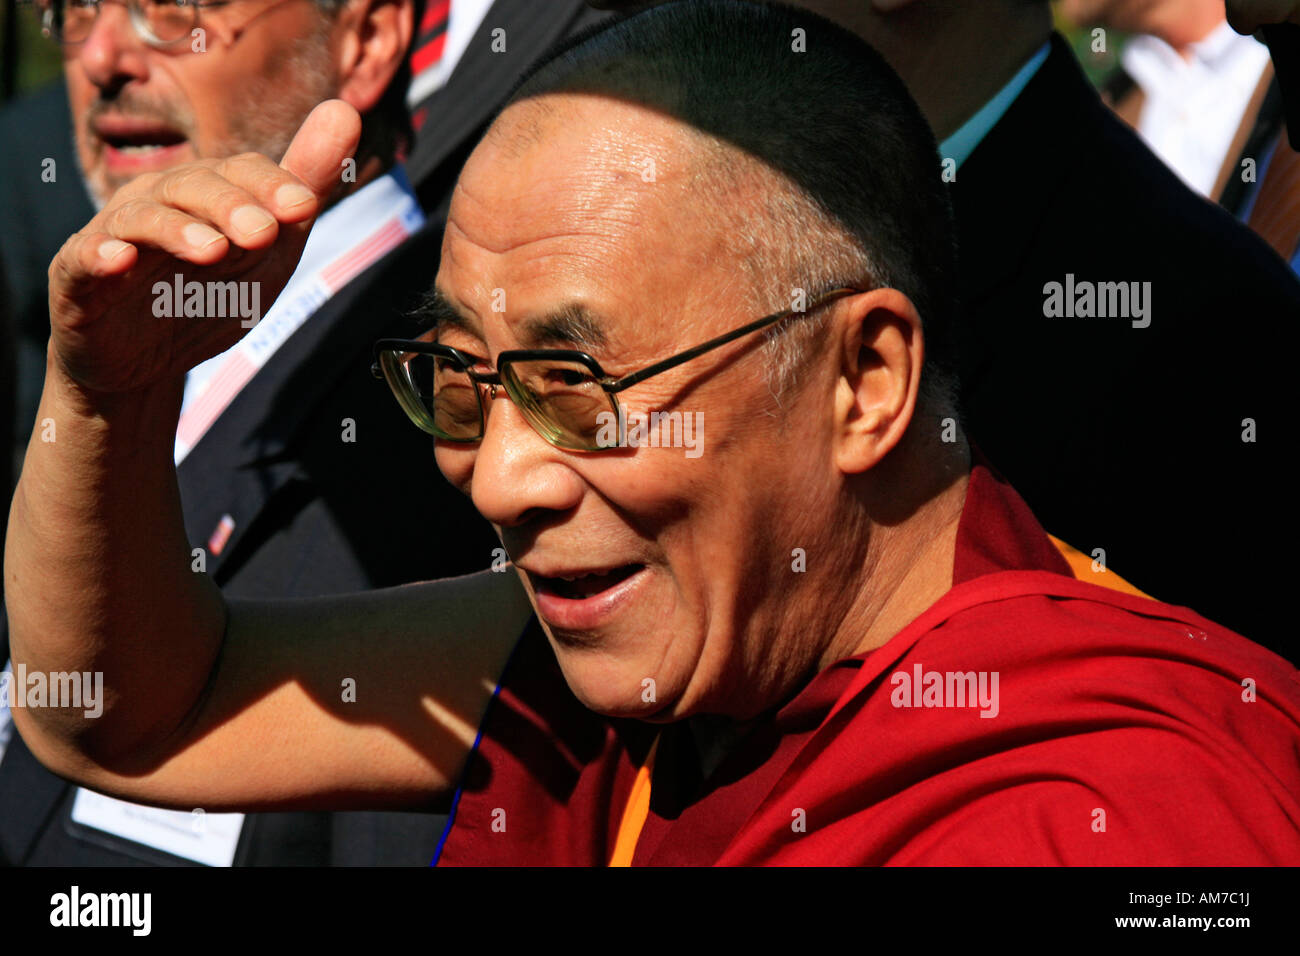 Visit of His Holyness the 14th Dalai Lama at September 22nd at the open-air museum Hessenpark, Neu-Anspach, Hesse, Germany. Stock Photo